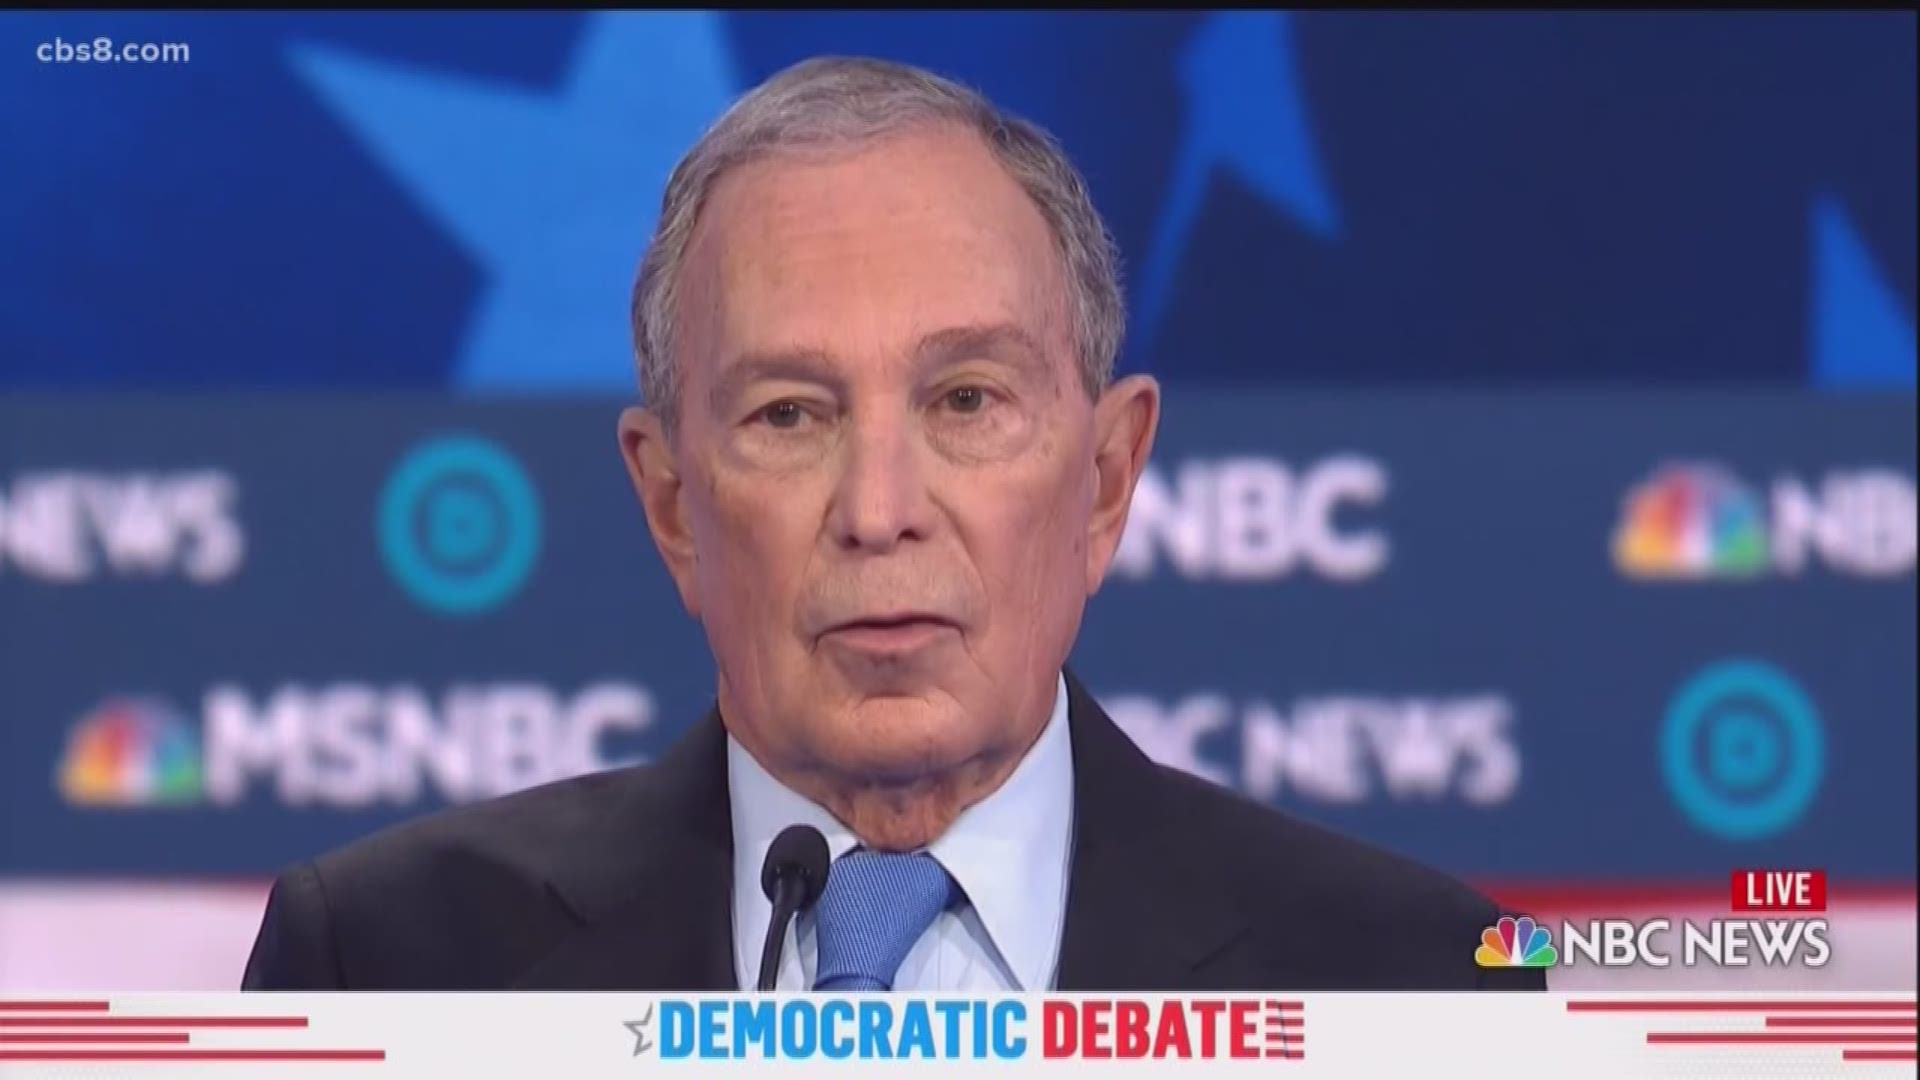 Bloomberg, the former New York mayor, was forced to defend his divisive record on race, gender and Wall Street in his debate-stage debut.